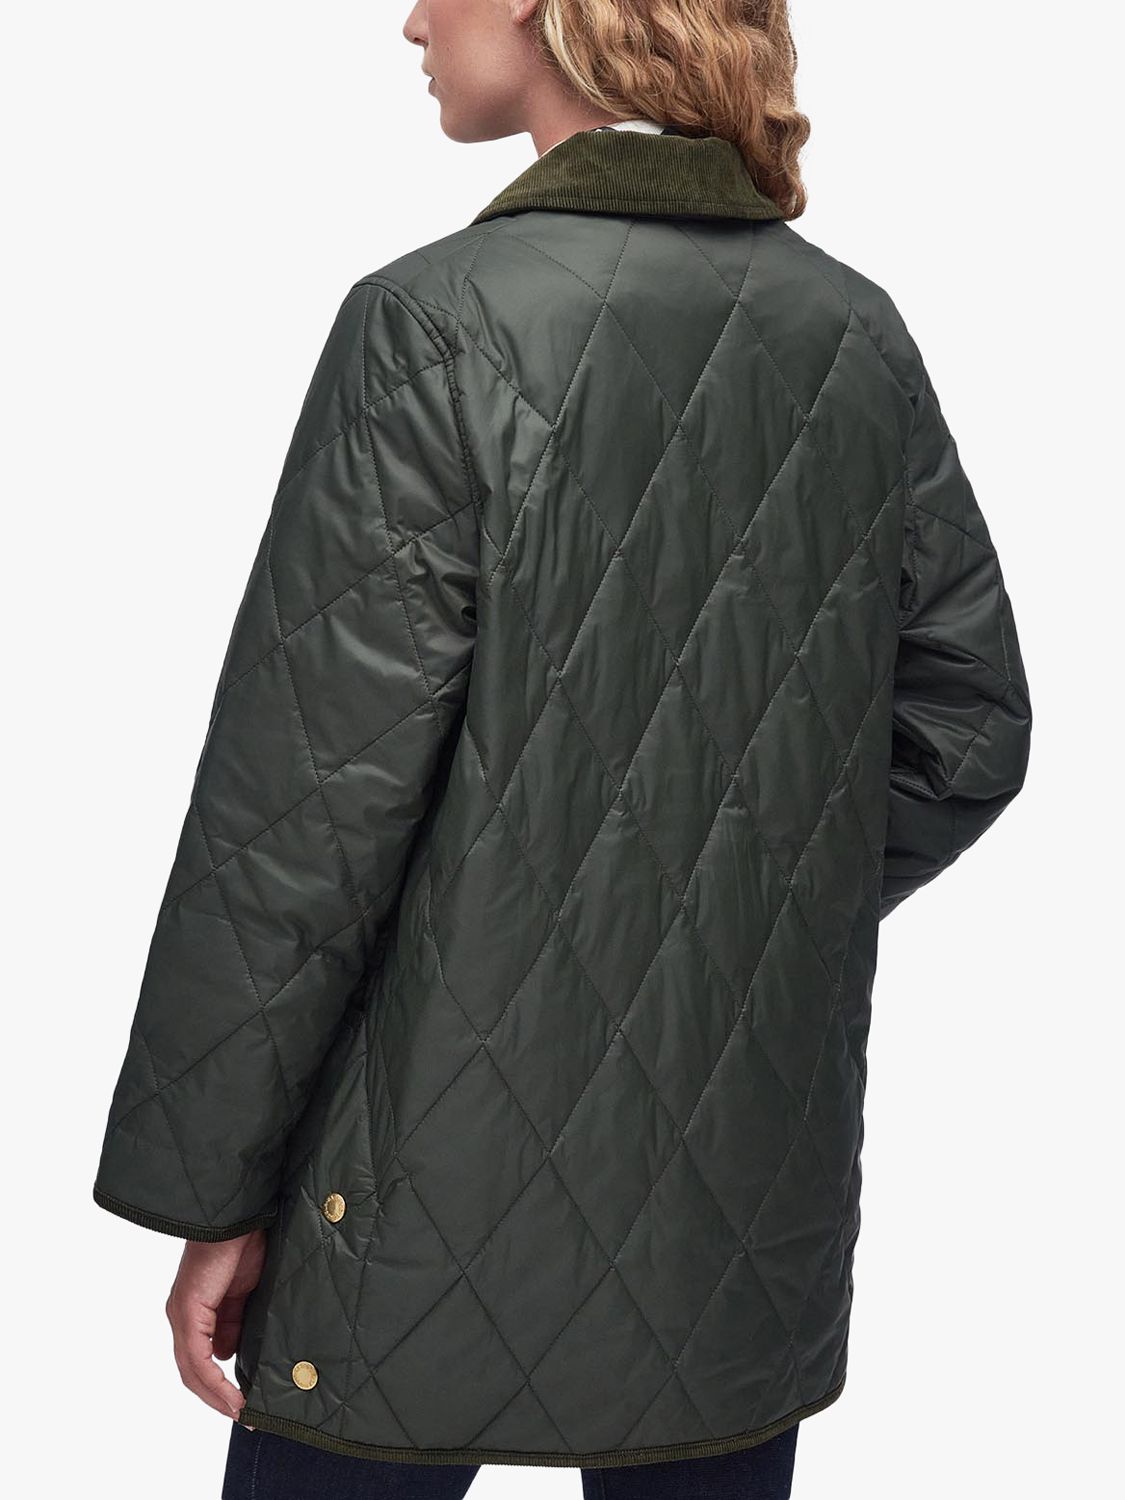 Barbour Highcliffe Quilted Jacket, Sage, 8